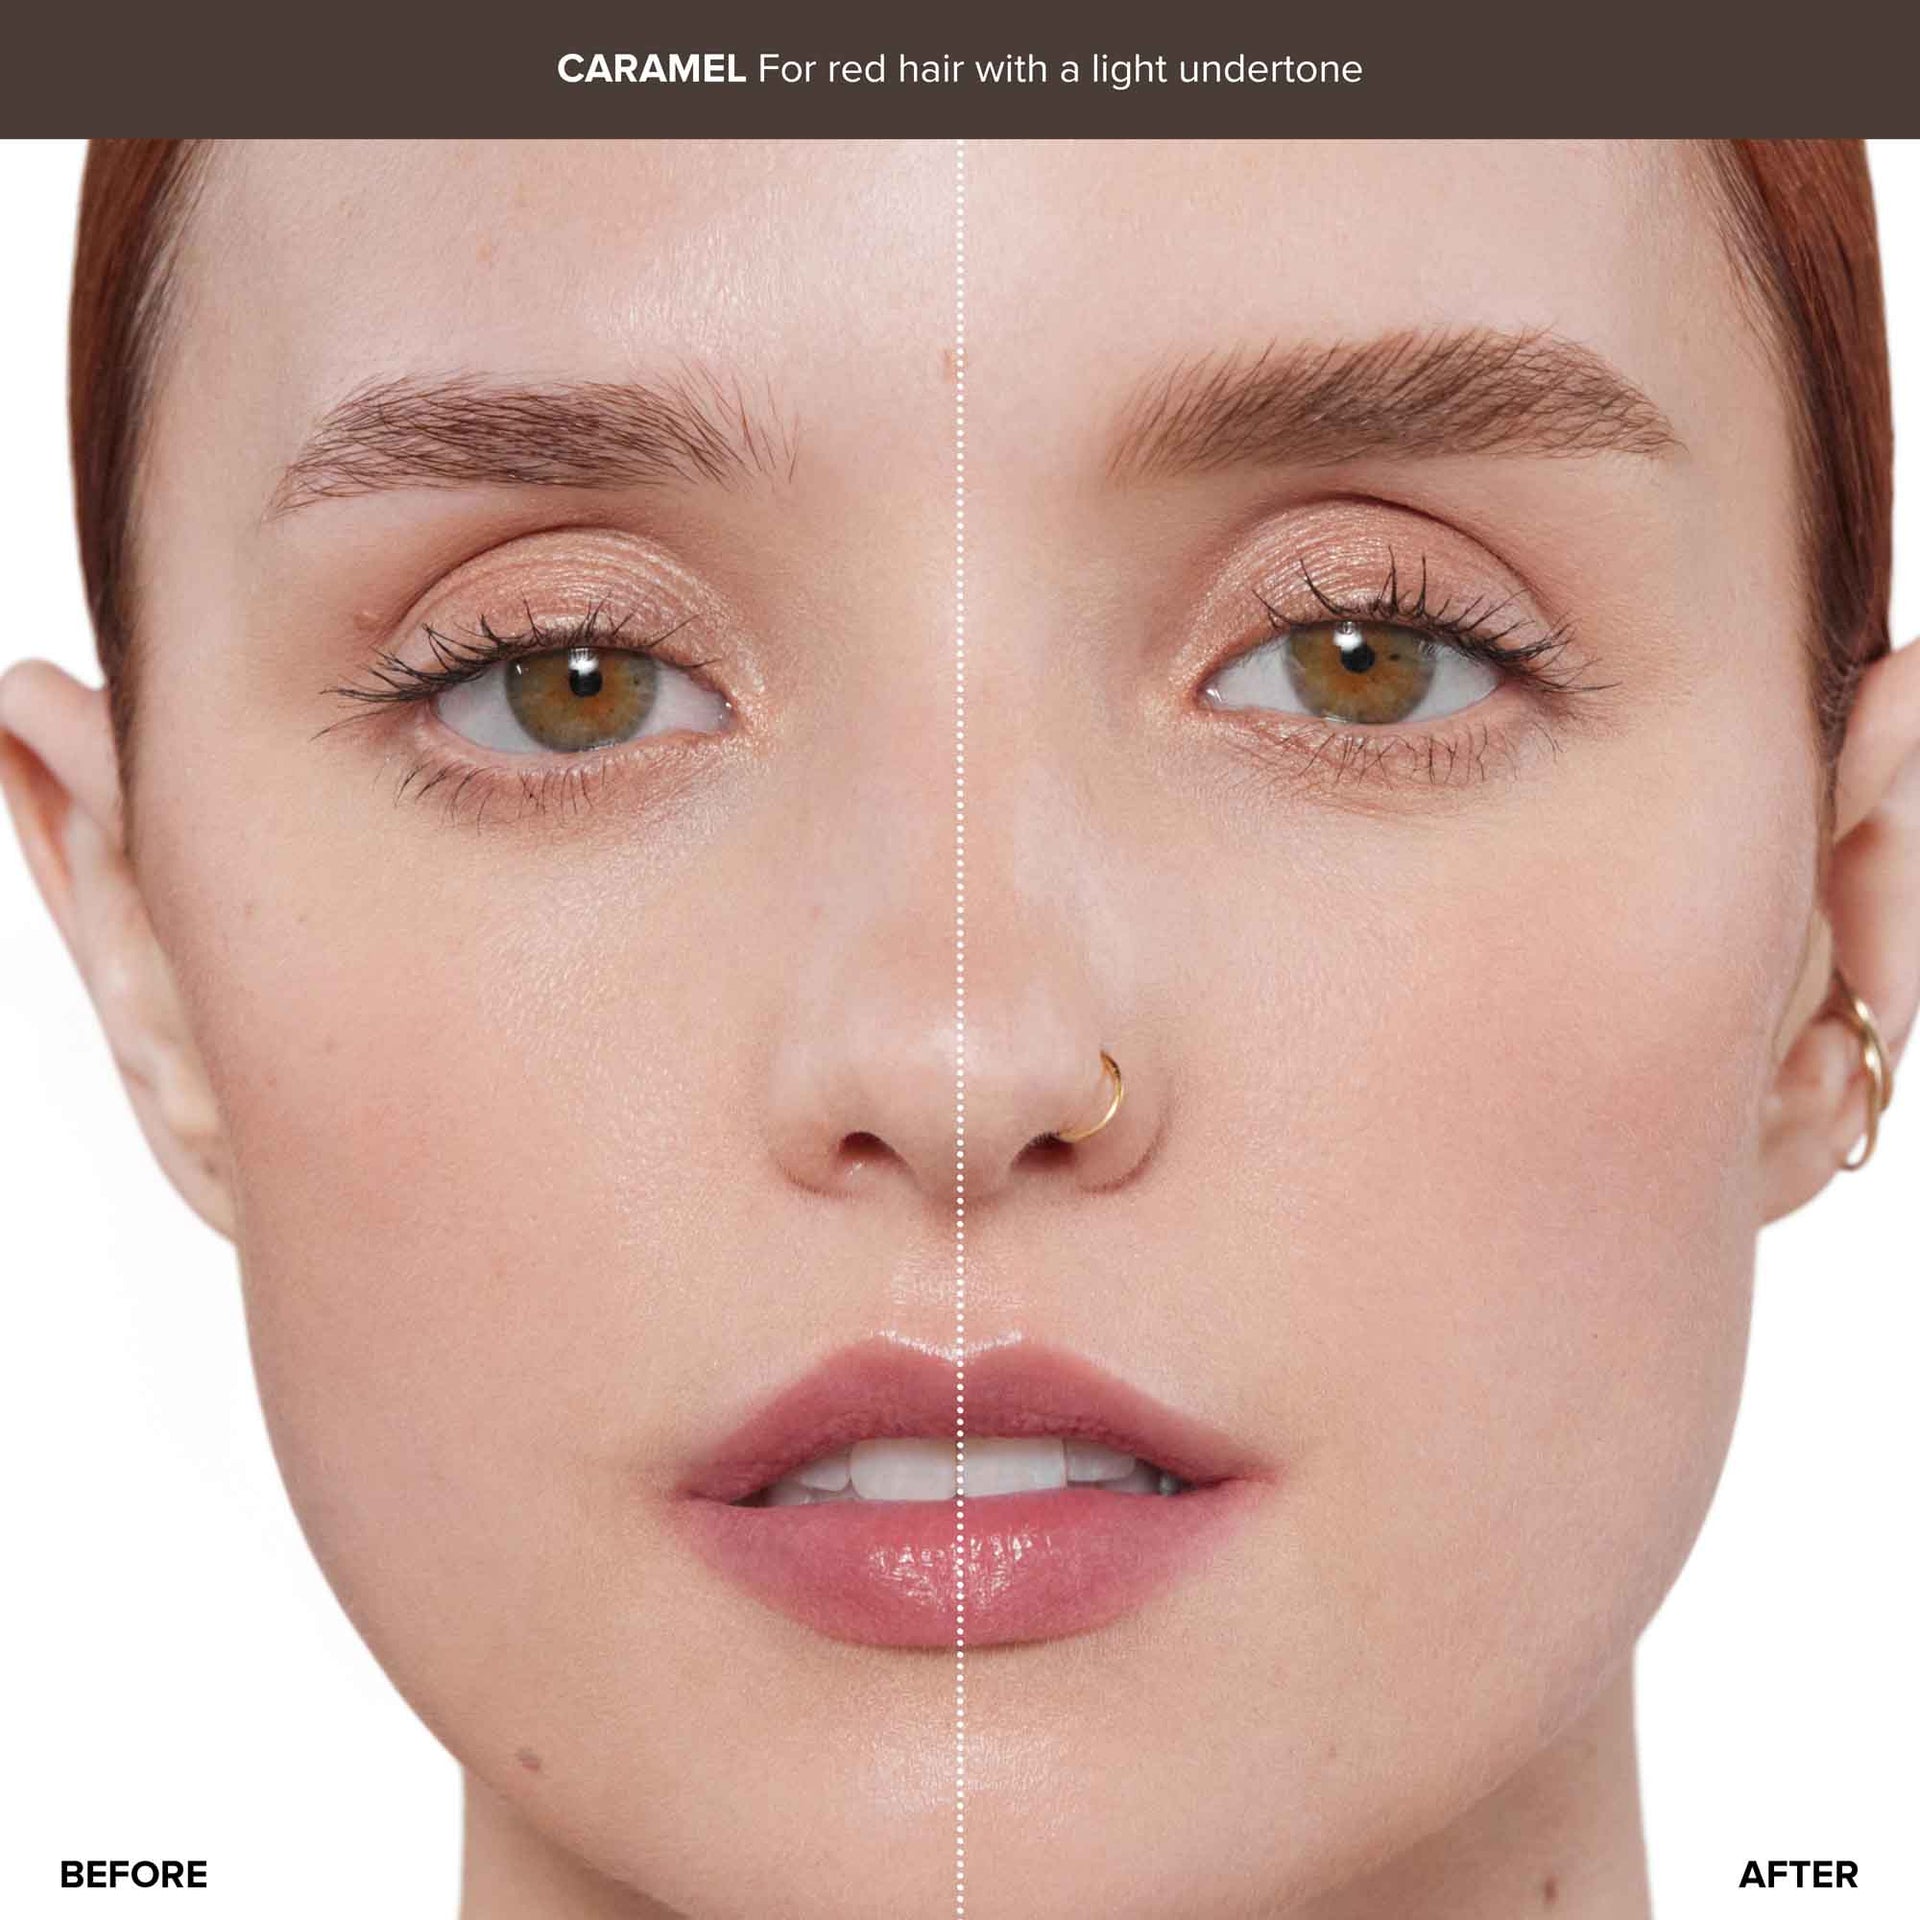 Caramel | Before and after - Caramel